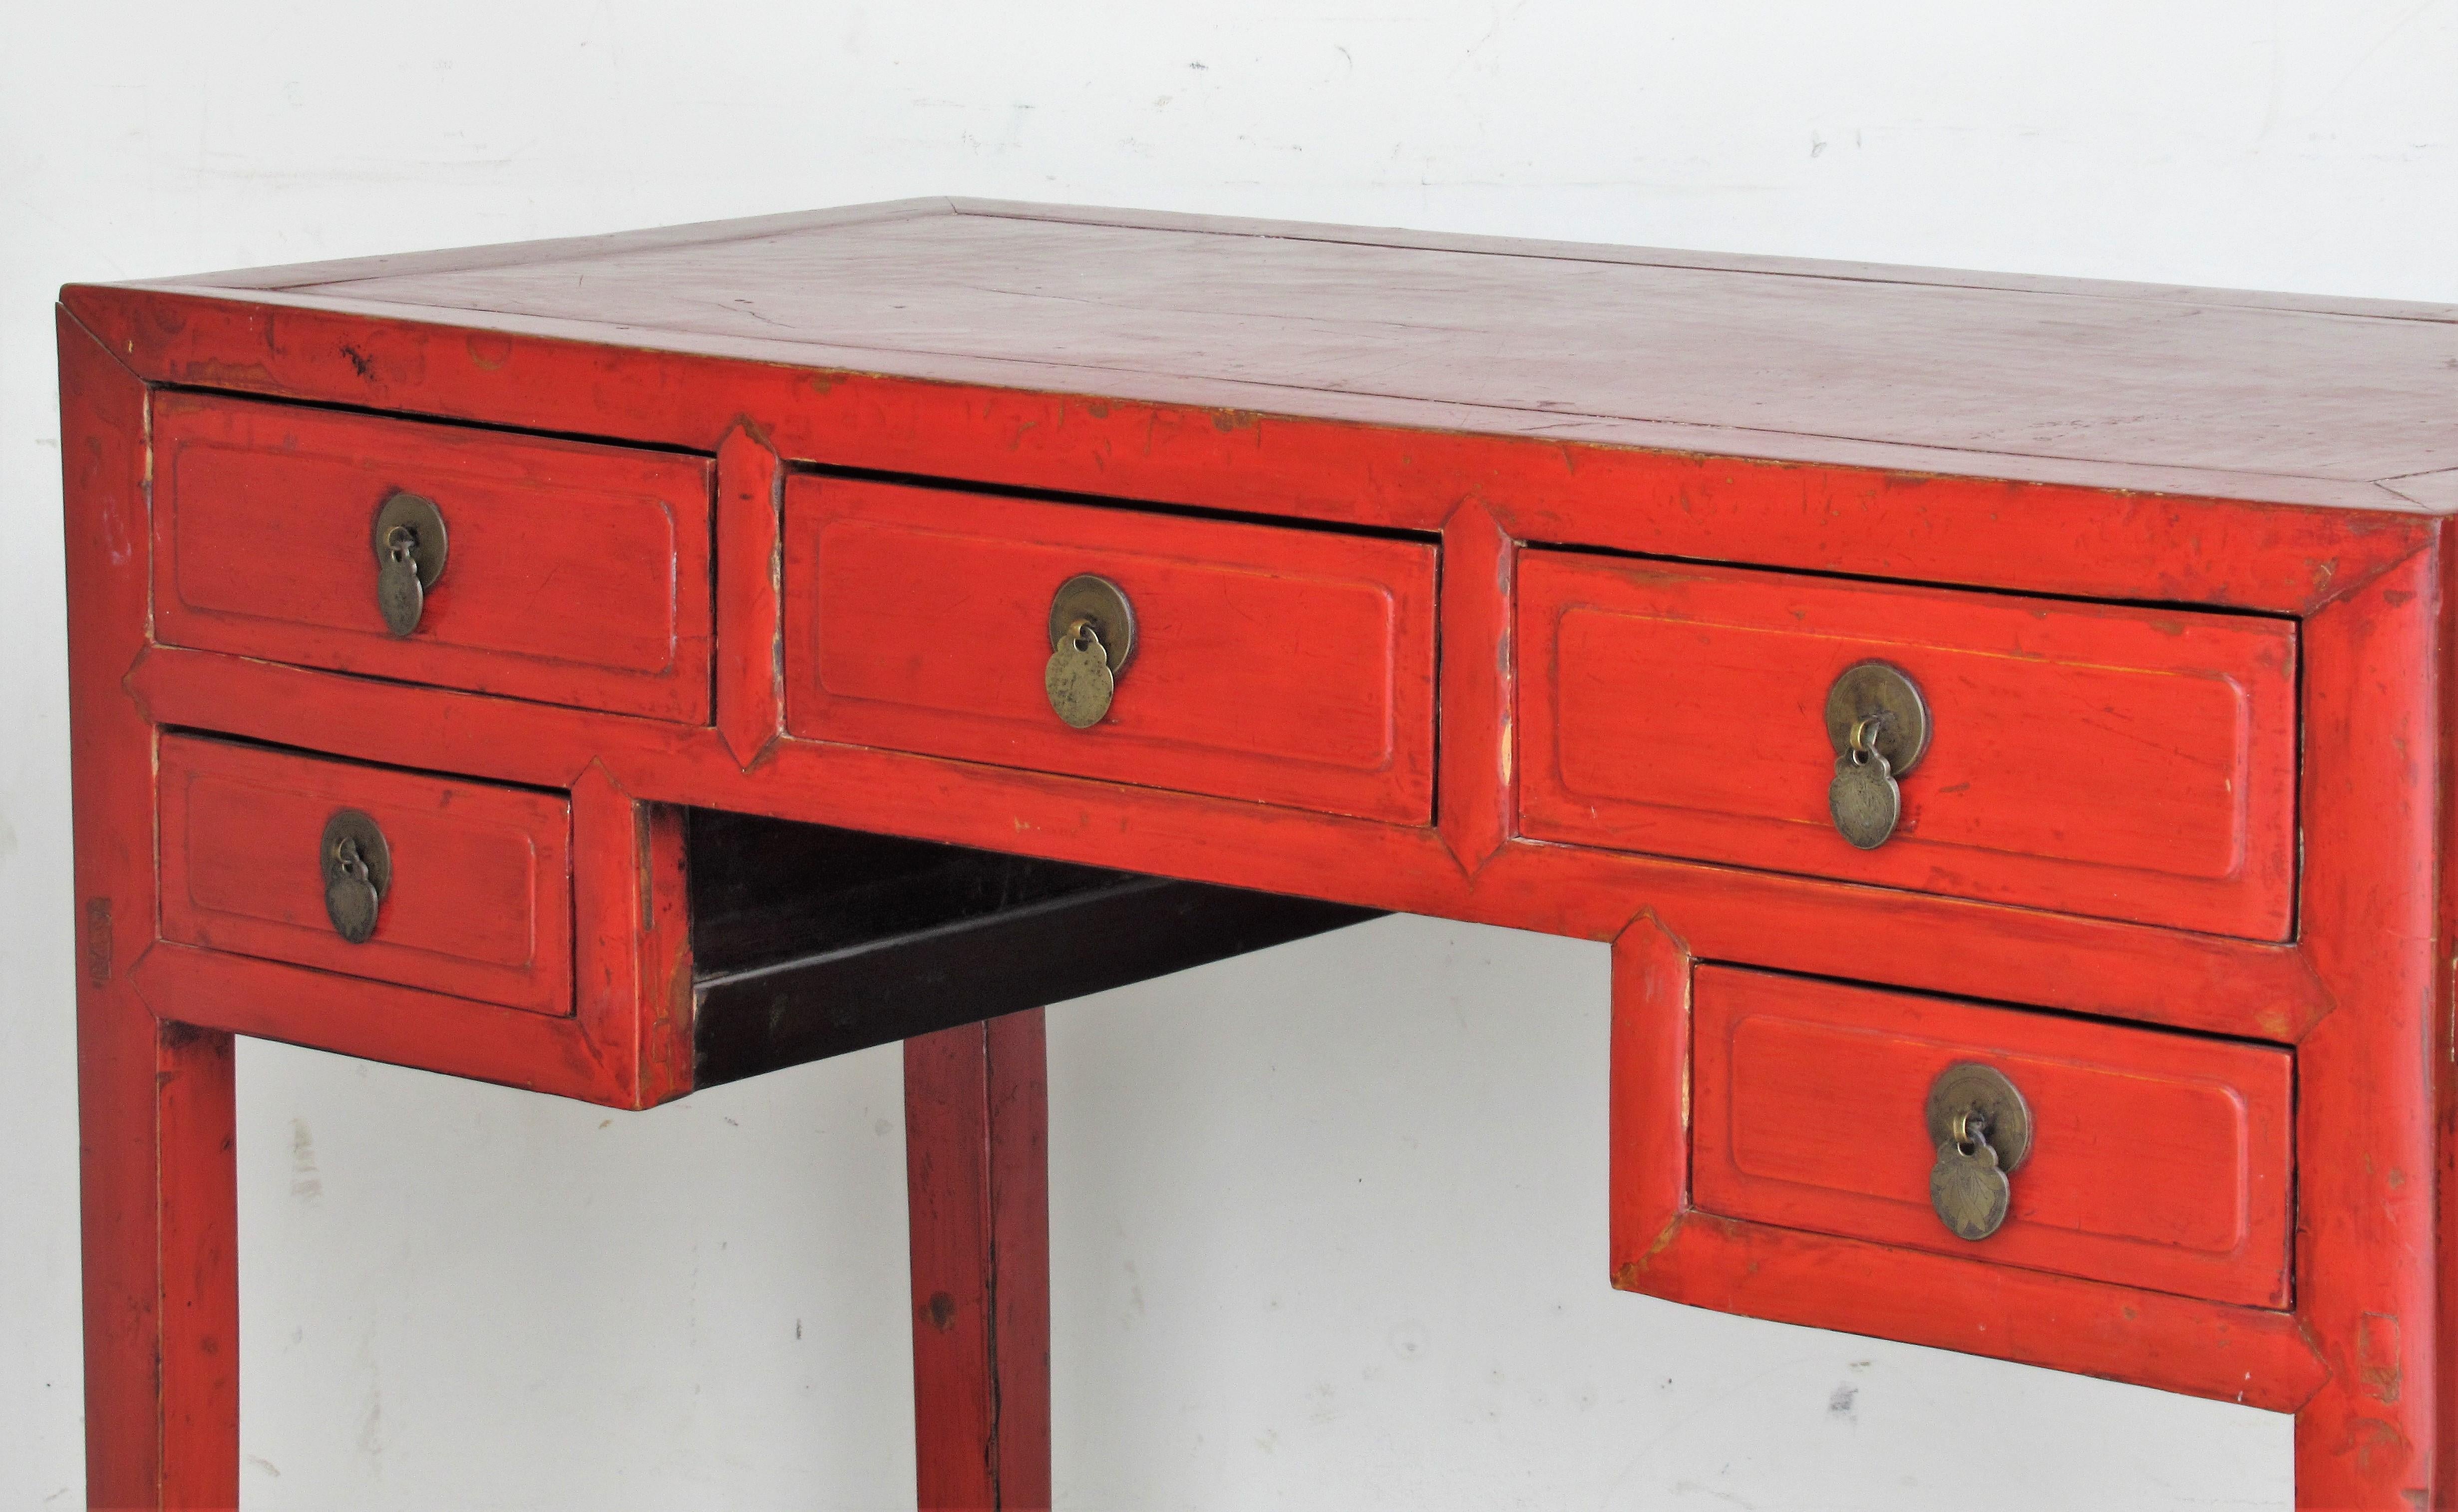 Antique Chinese mandarin red lacquered console table server with five deep drawers / fine brass hardware. dovetailing at rear of drawers / tenon construction on case. Overall beautiful aged surface color. Circa 1900-1920. Look at all pictures and